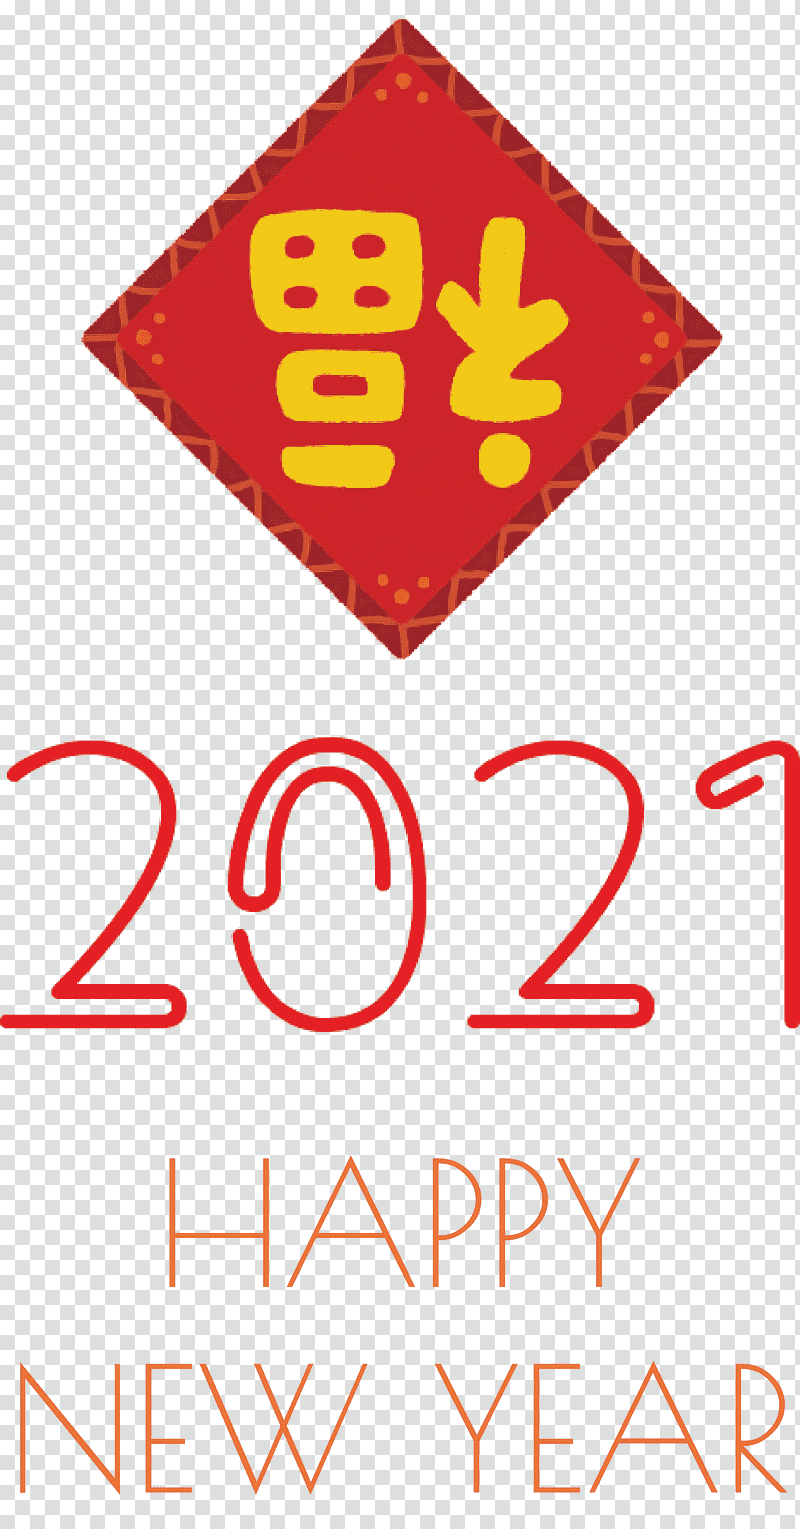 2021 Happy New Year 2021 New Year, Menu, Restaurant, Midautumn Festival, Meal, Smoothie, Taoyuan District transparent background PNG clipart